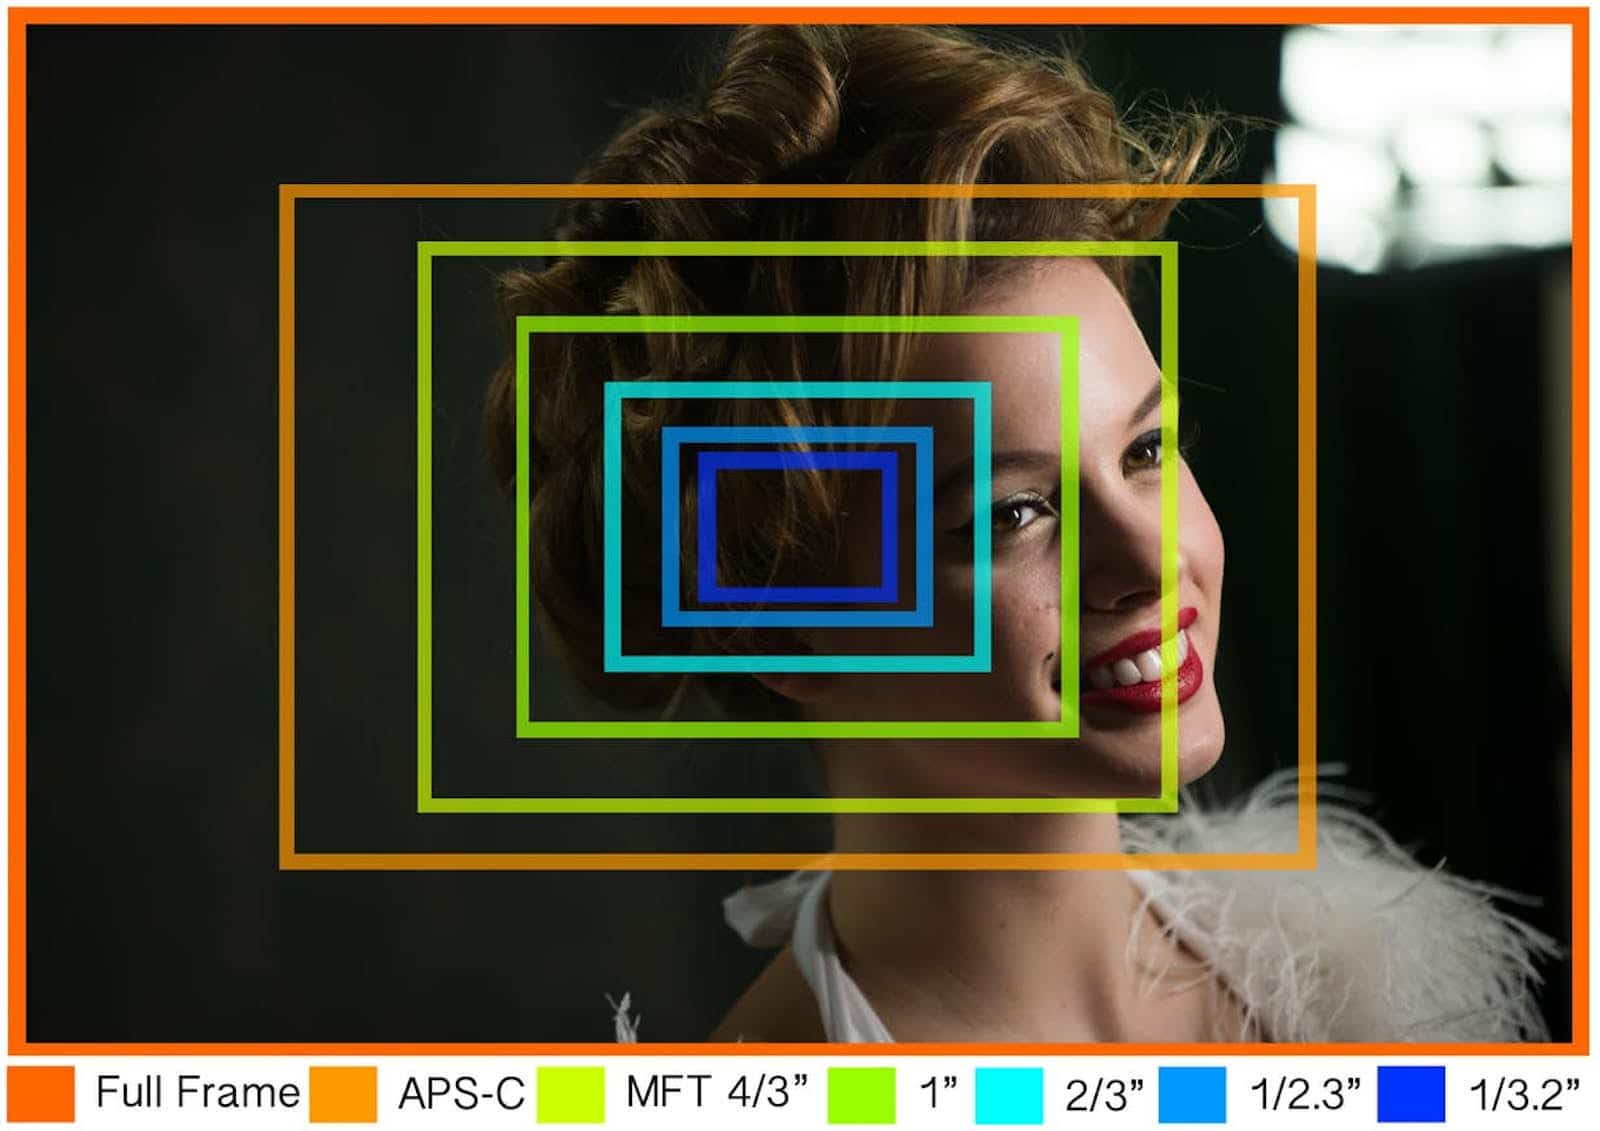 Camera Sizes Explained: What You Need to Know